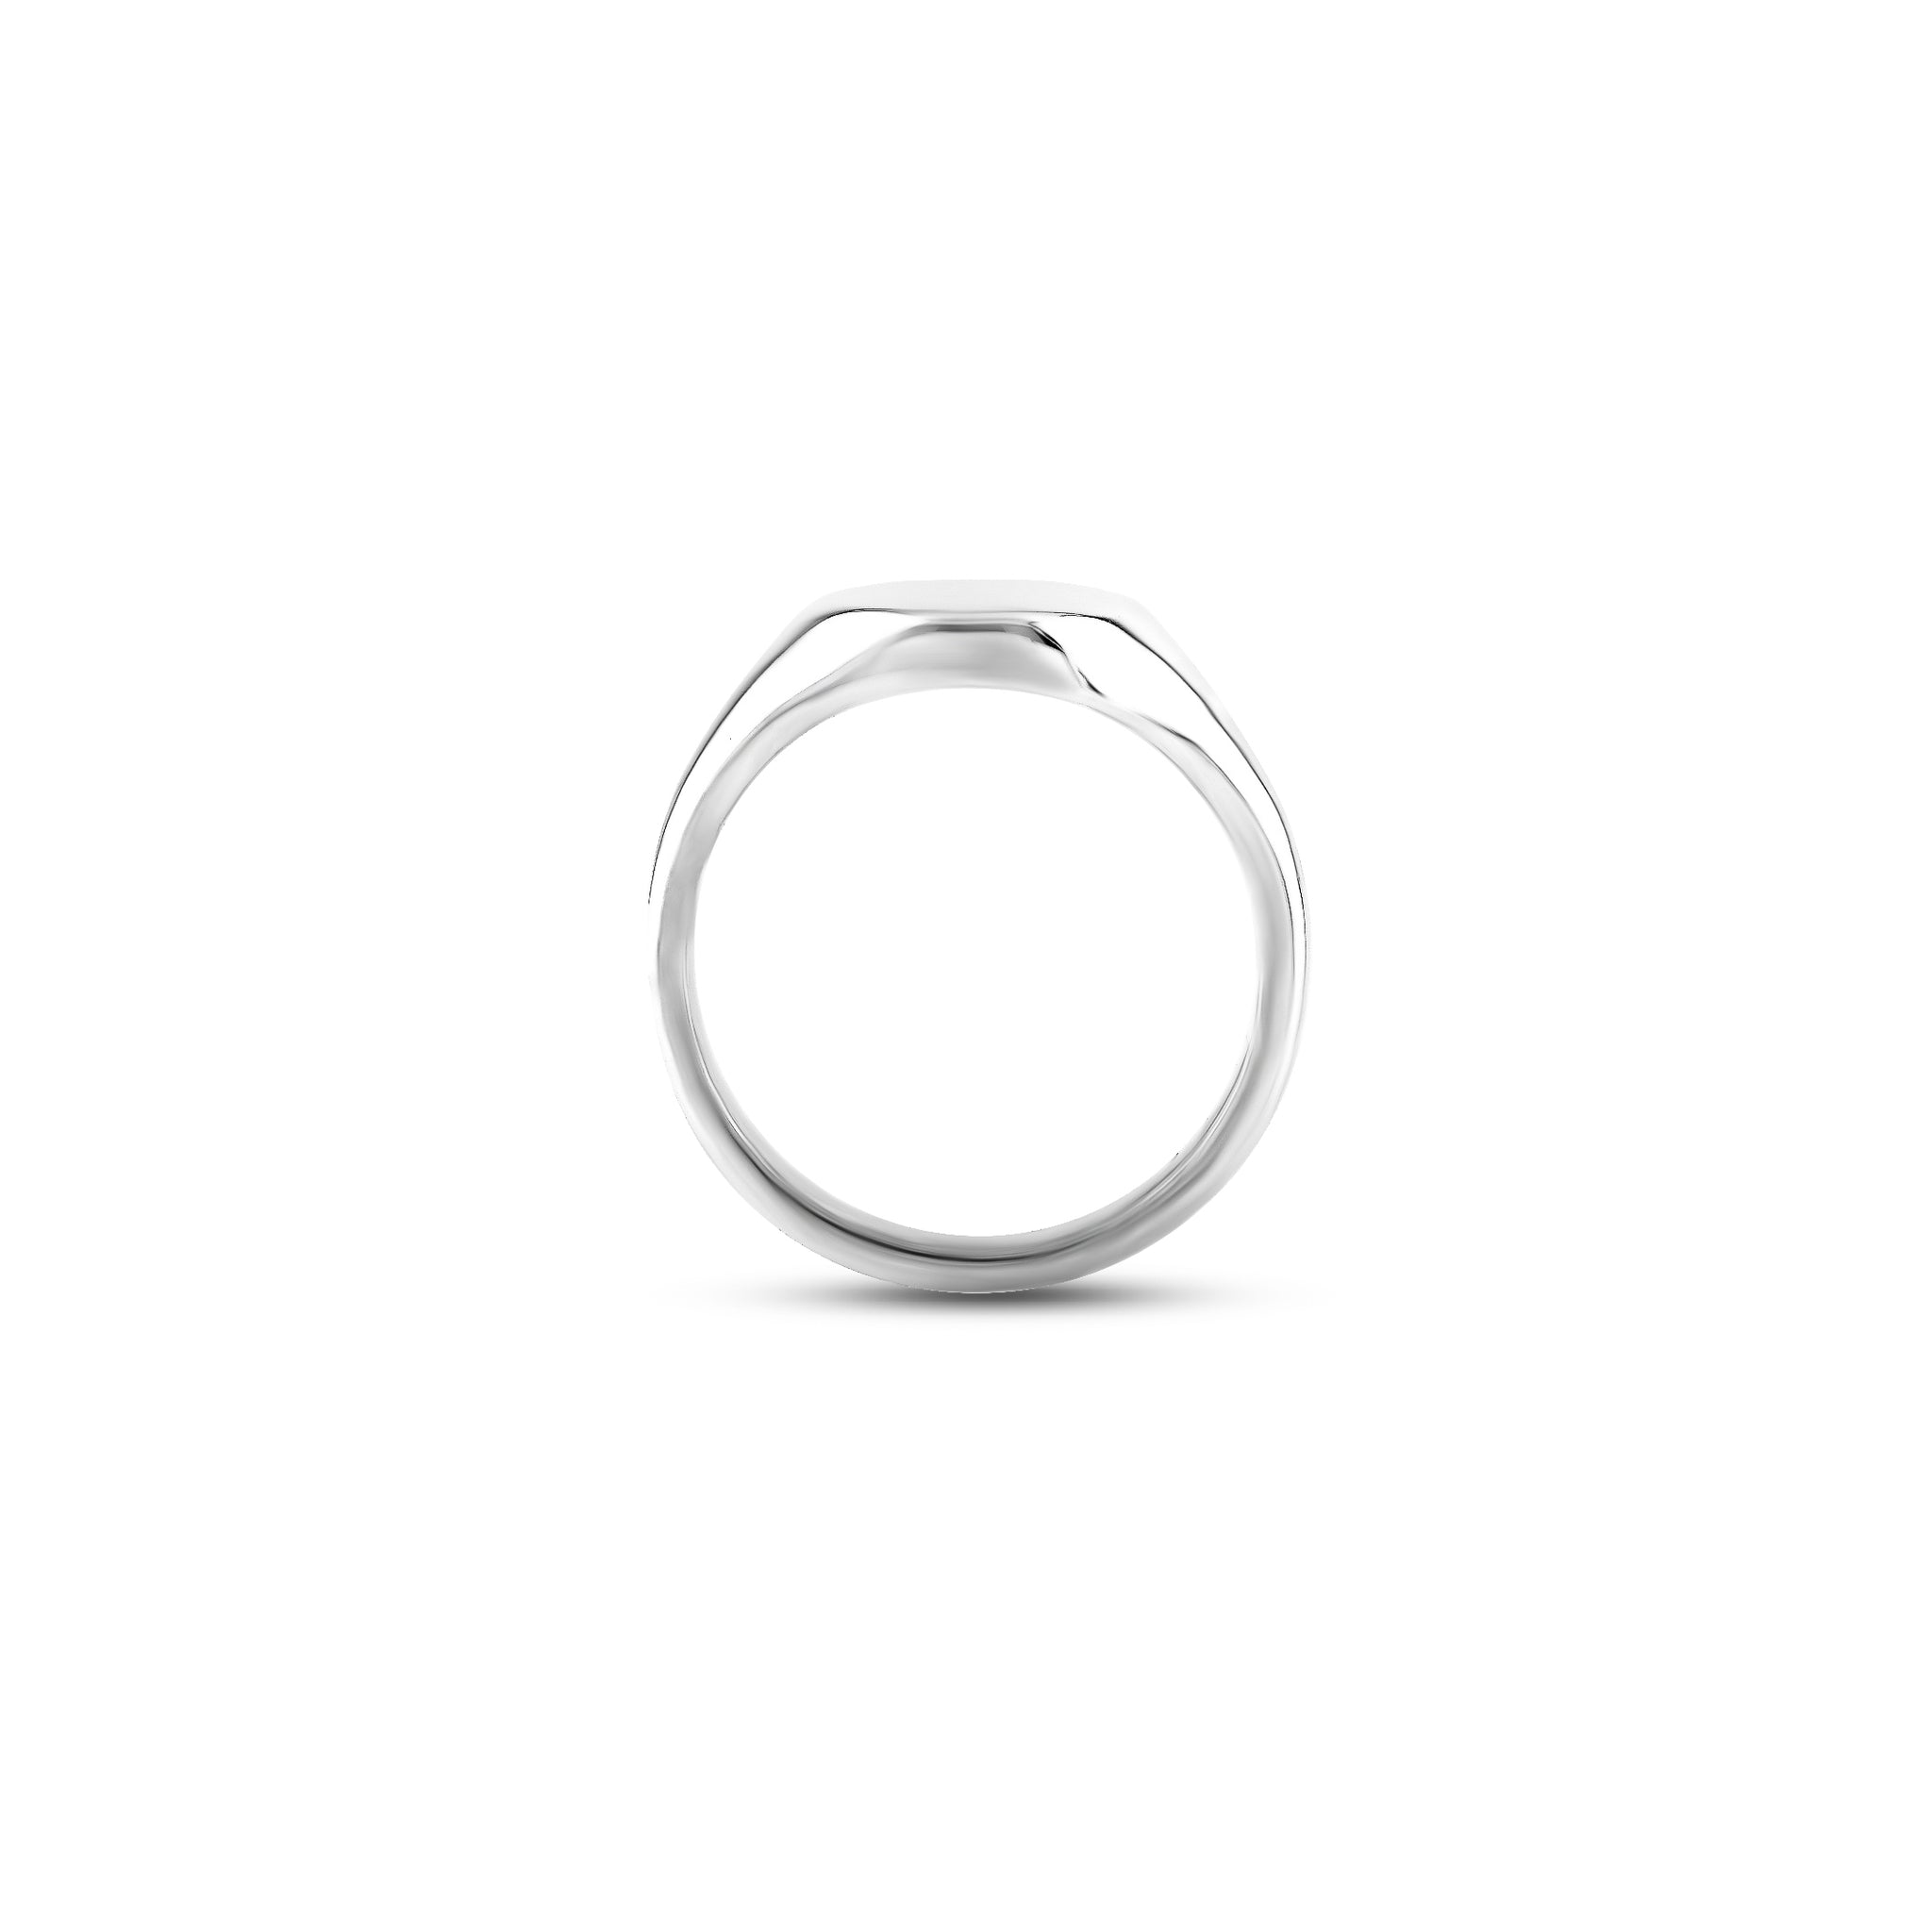 9ct White Gold 11 x 9mm Oval Signet Ring